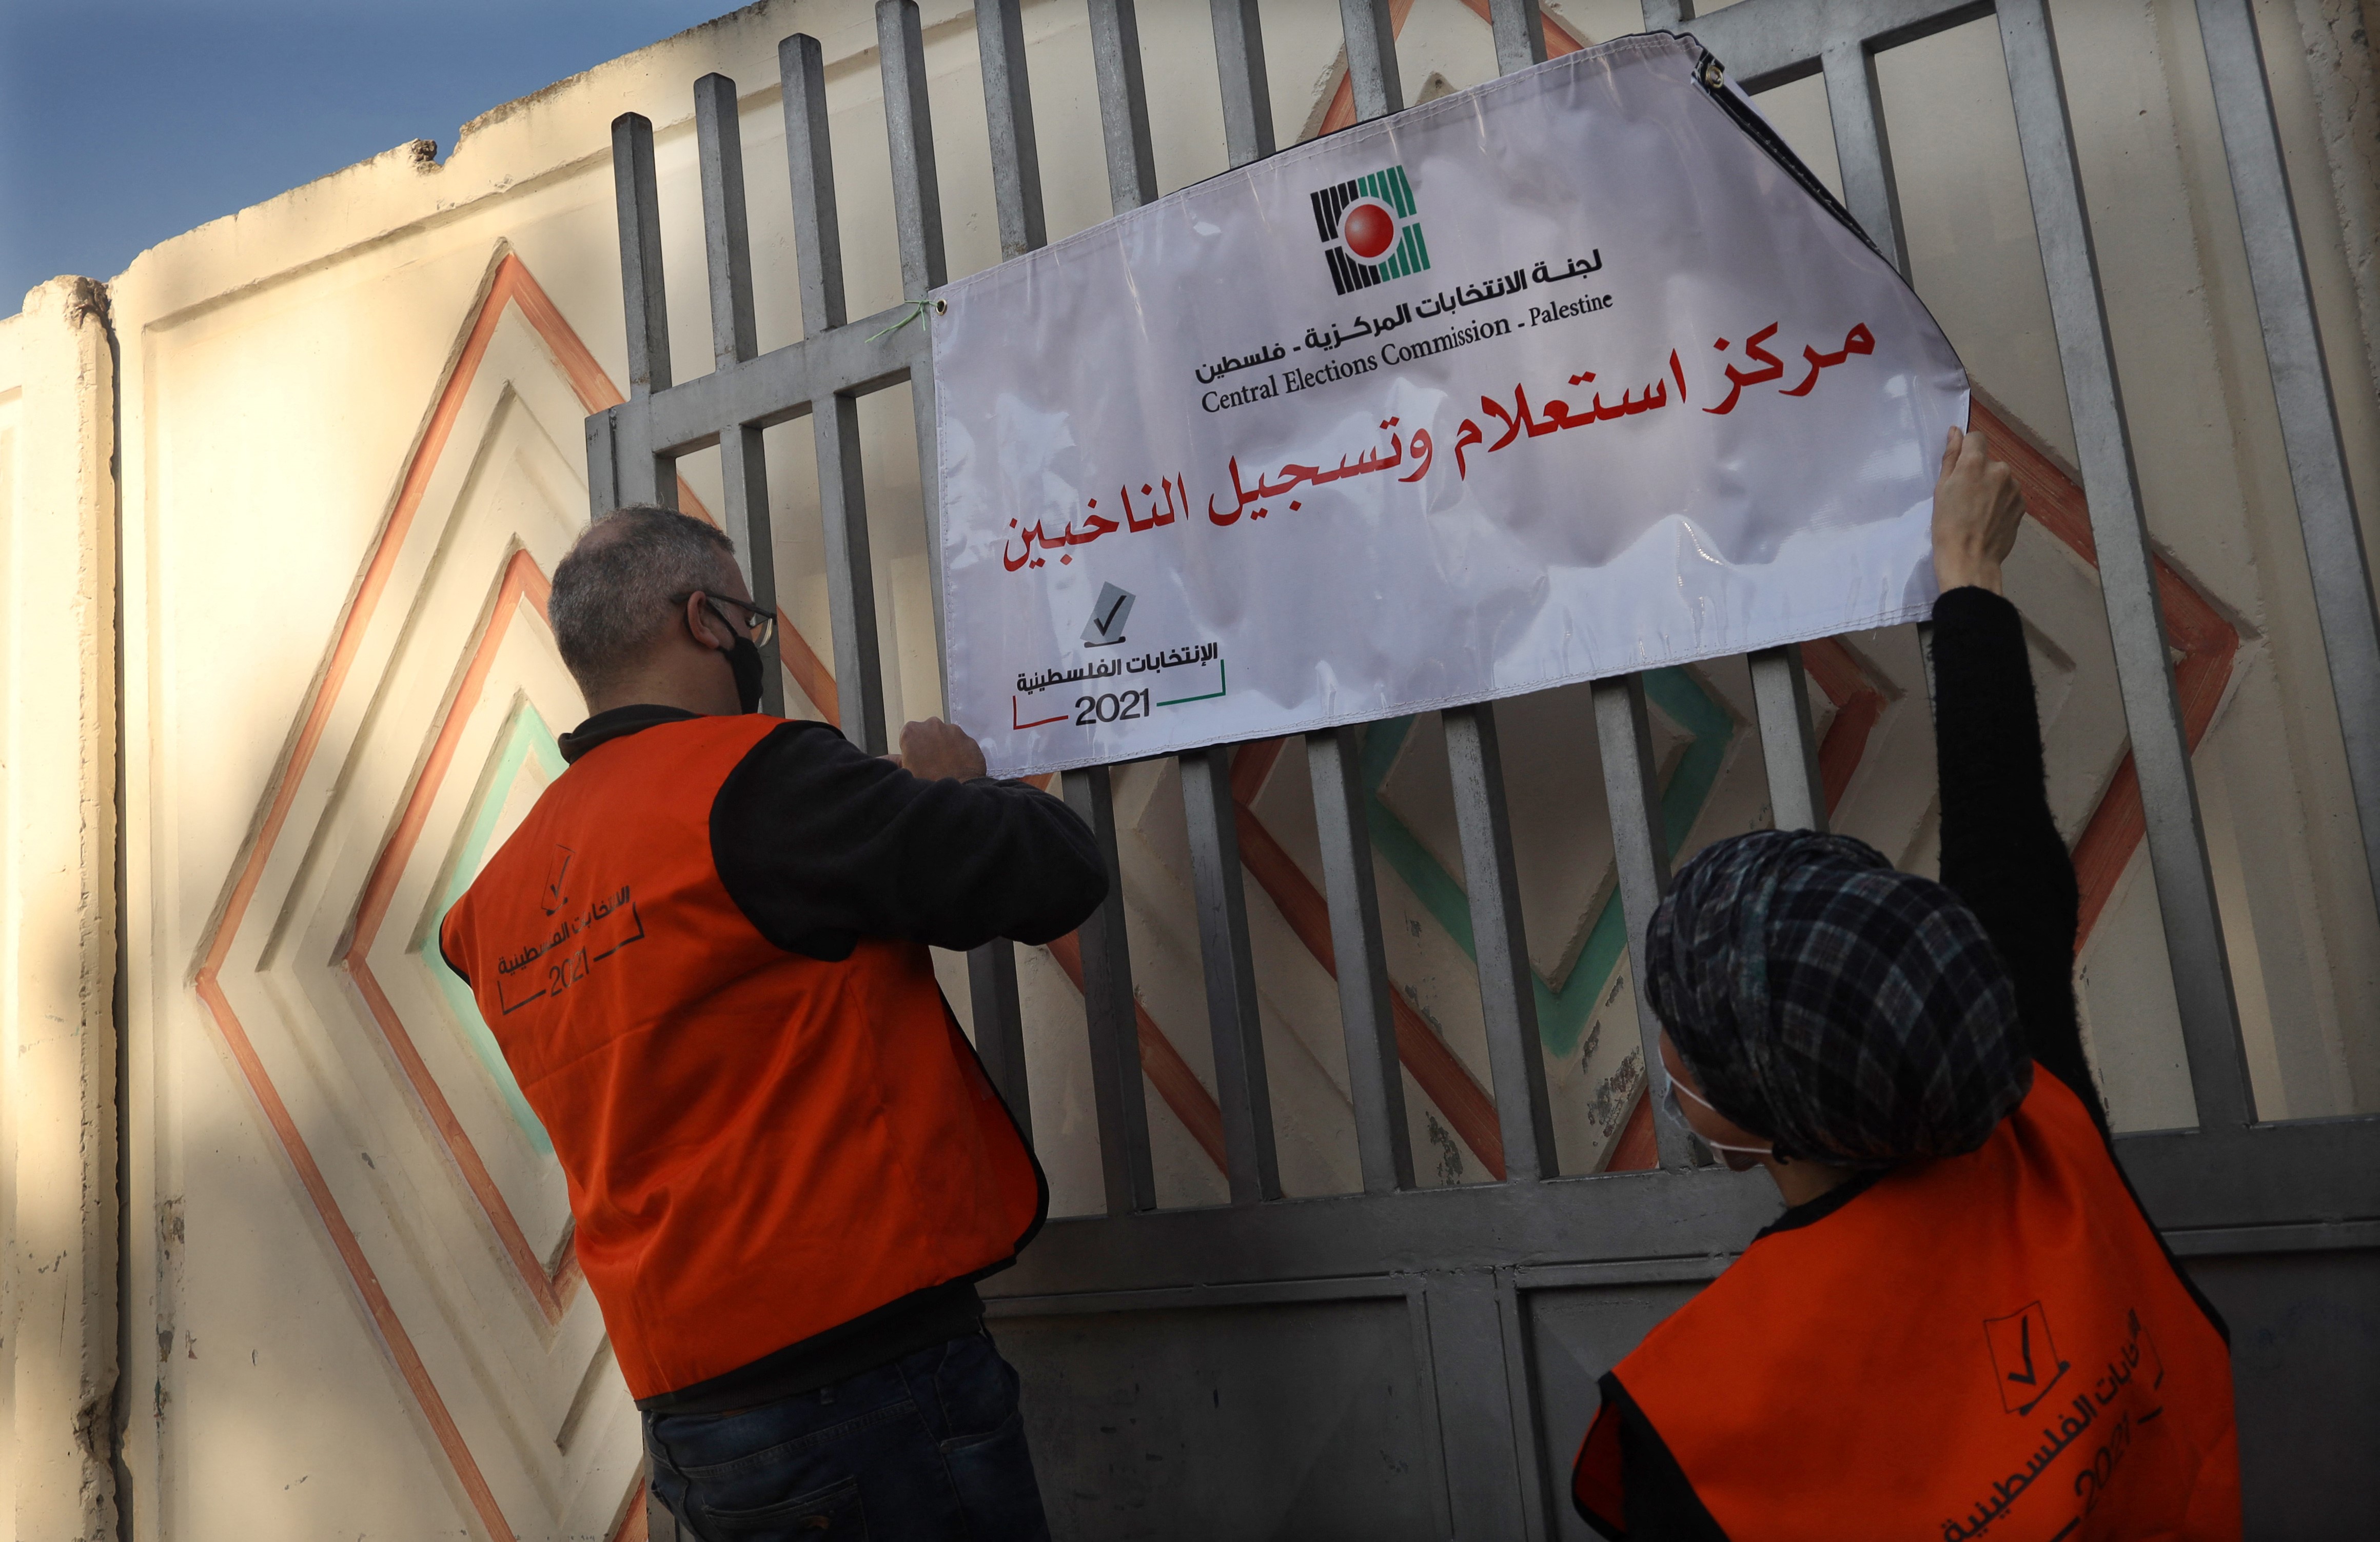 Palestinian members of Central Elections Commission open the first Voter Information and Registration Centre in Gaza City on February 10, 2021